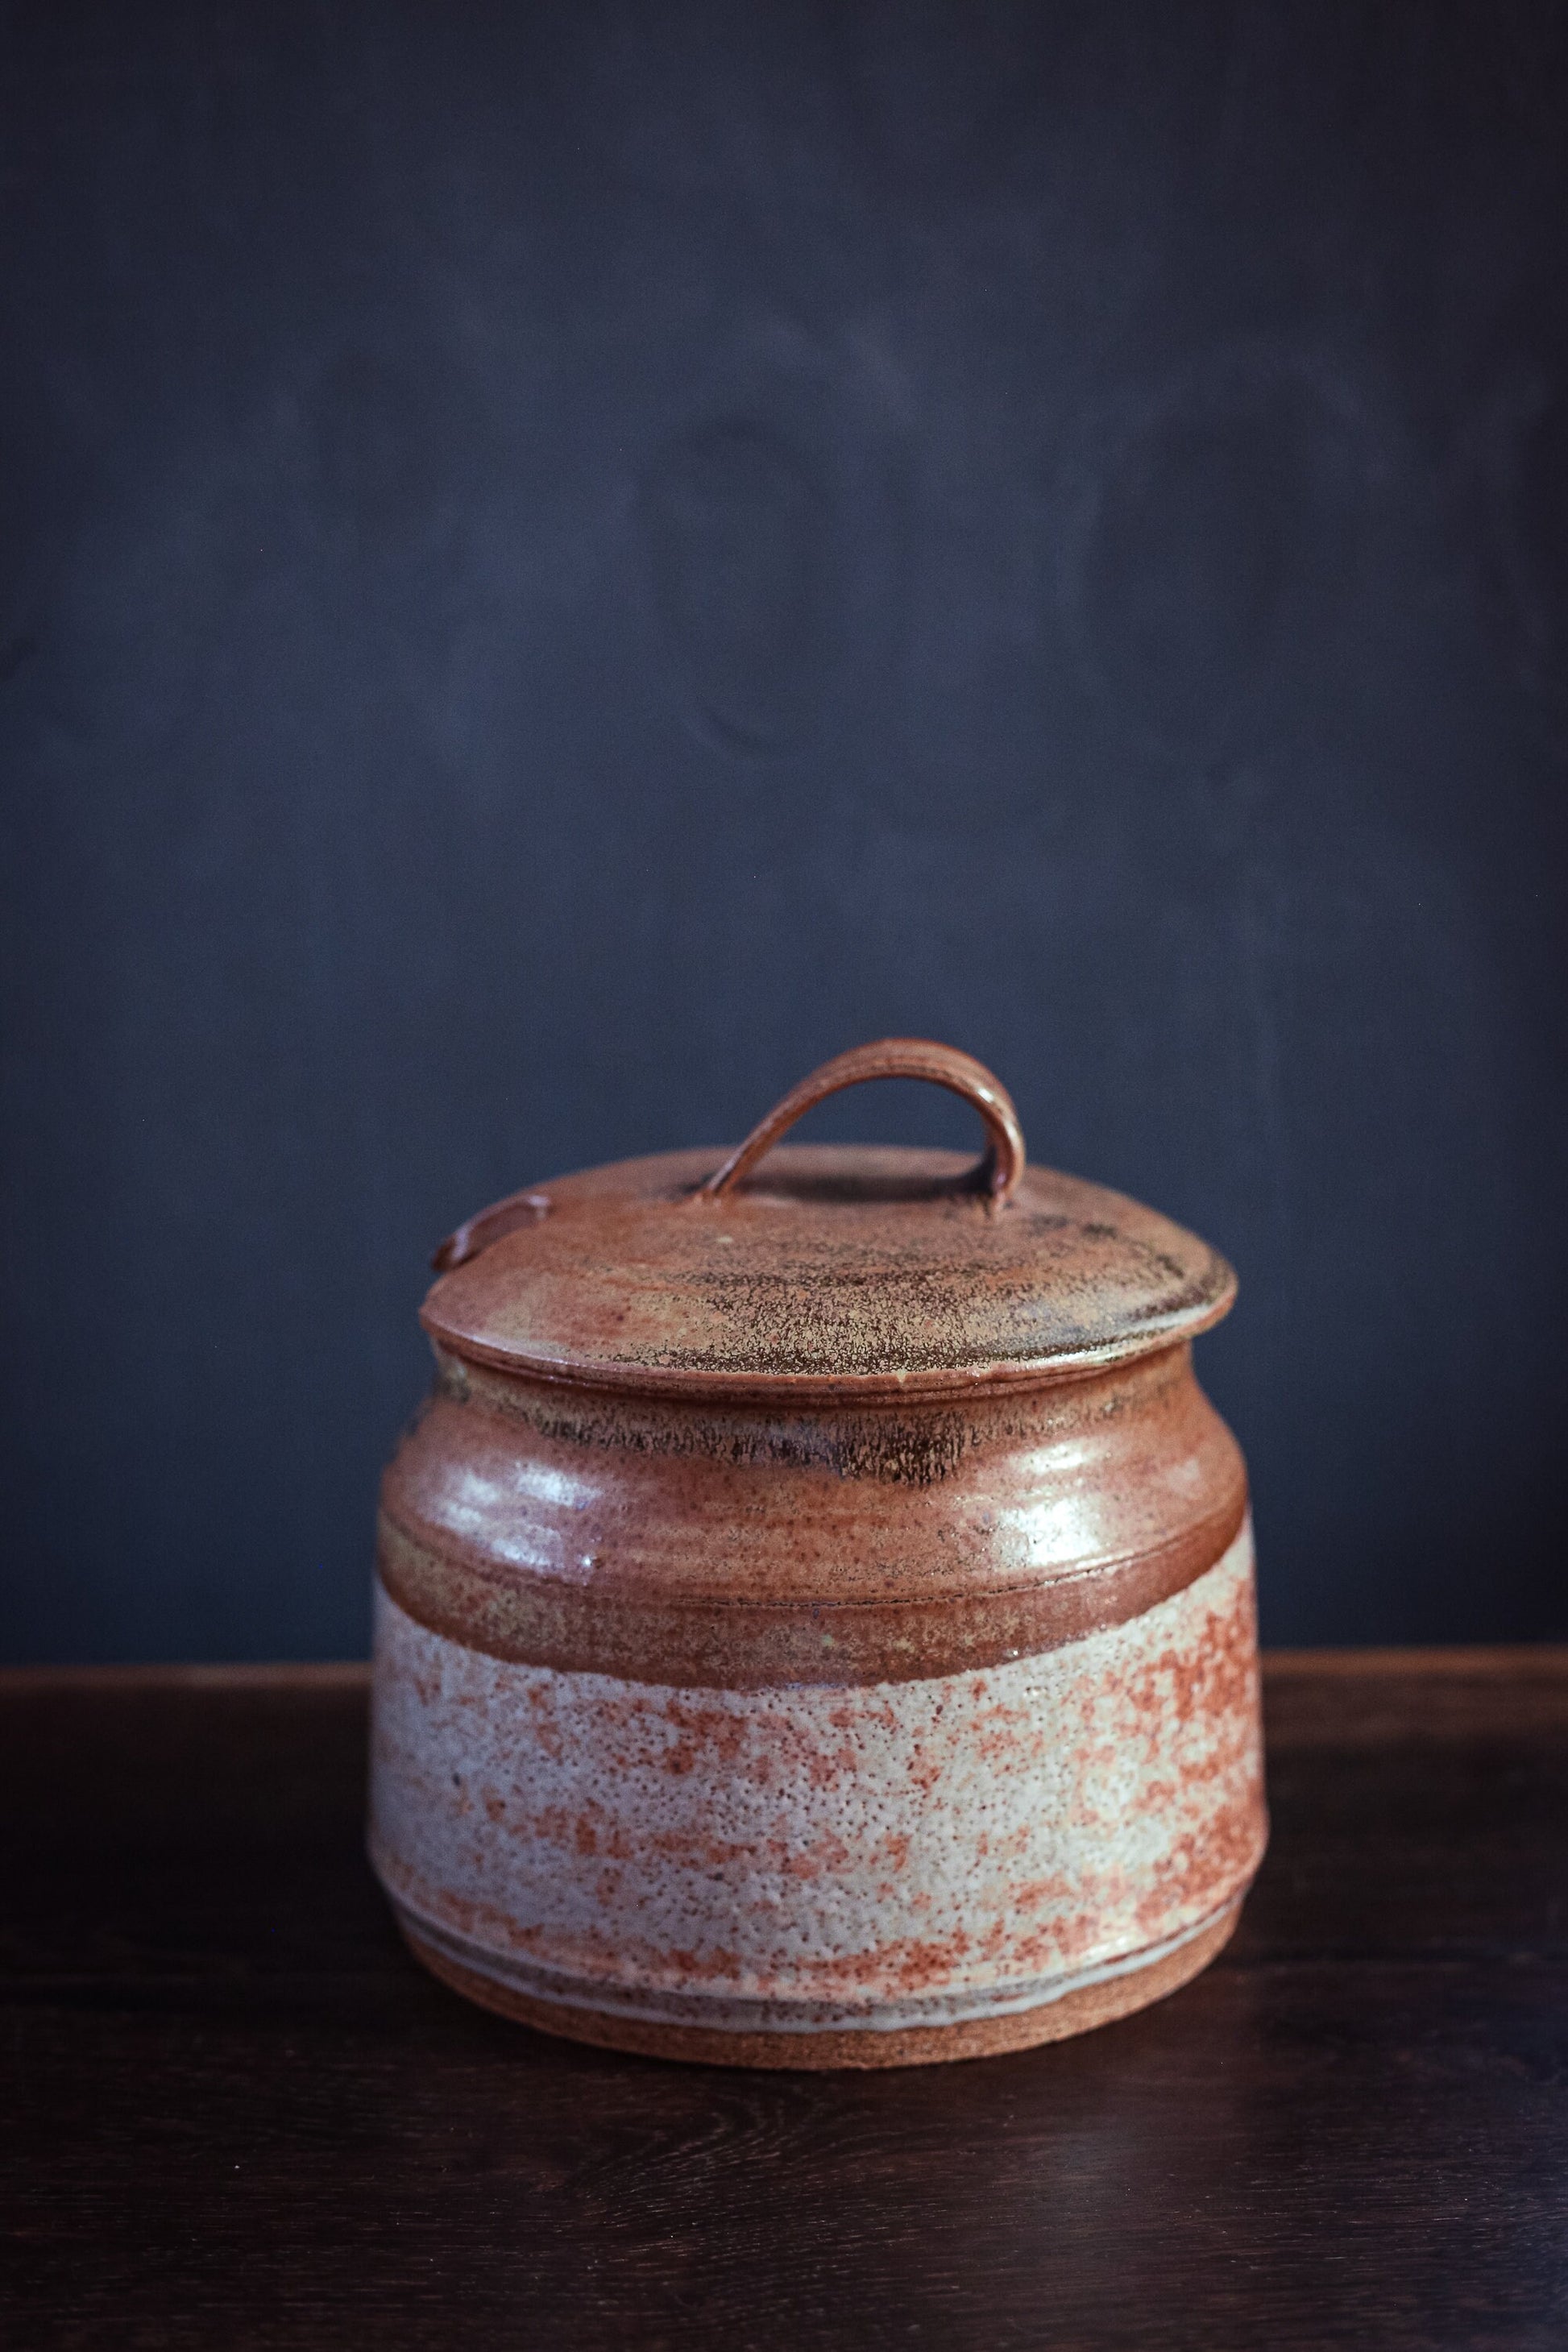 Hand Thrown Lidded Ceramic Canister with Spoon Opening - Vintage Signed Boch Studio Pottery Speckled Rust & Earth Tone Glaze